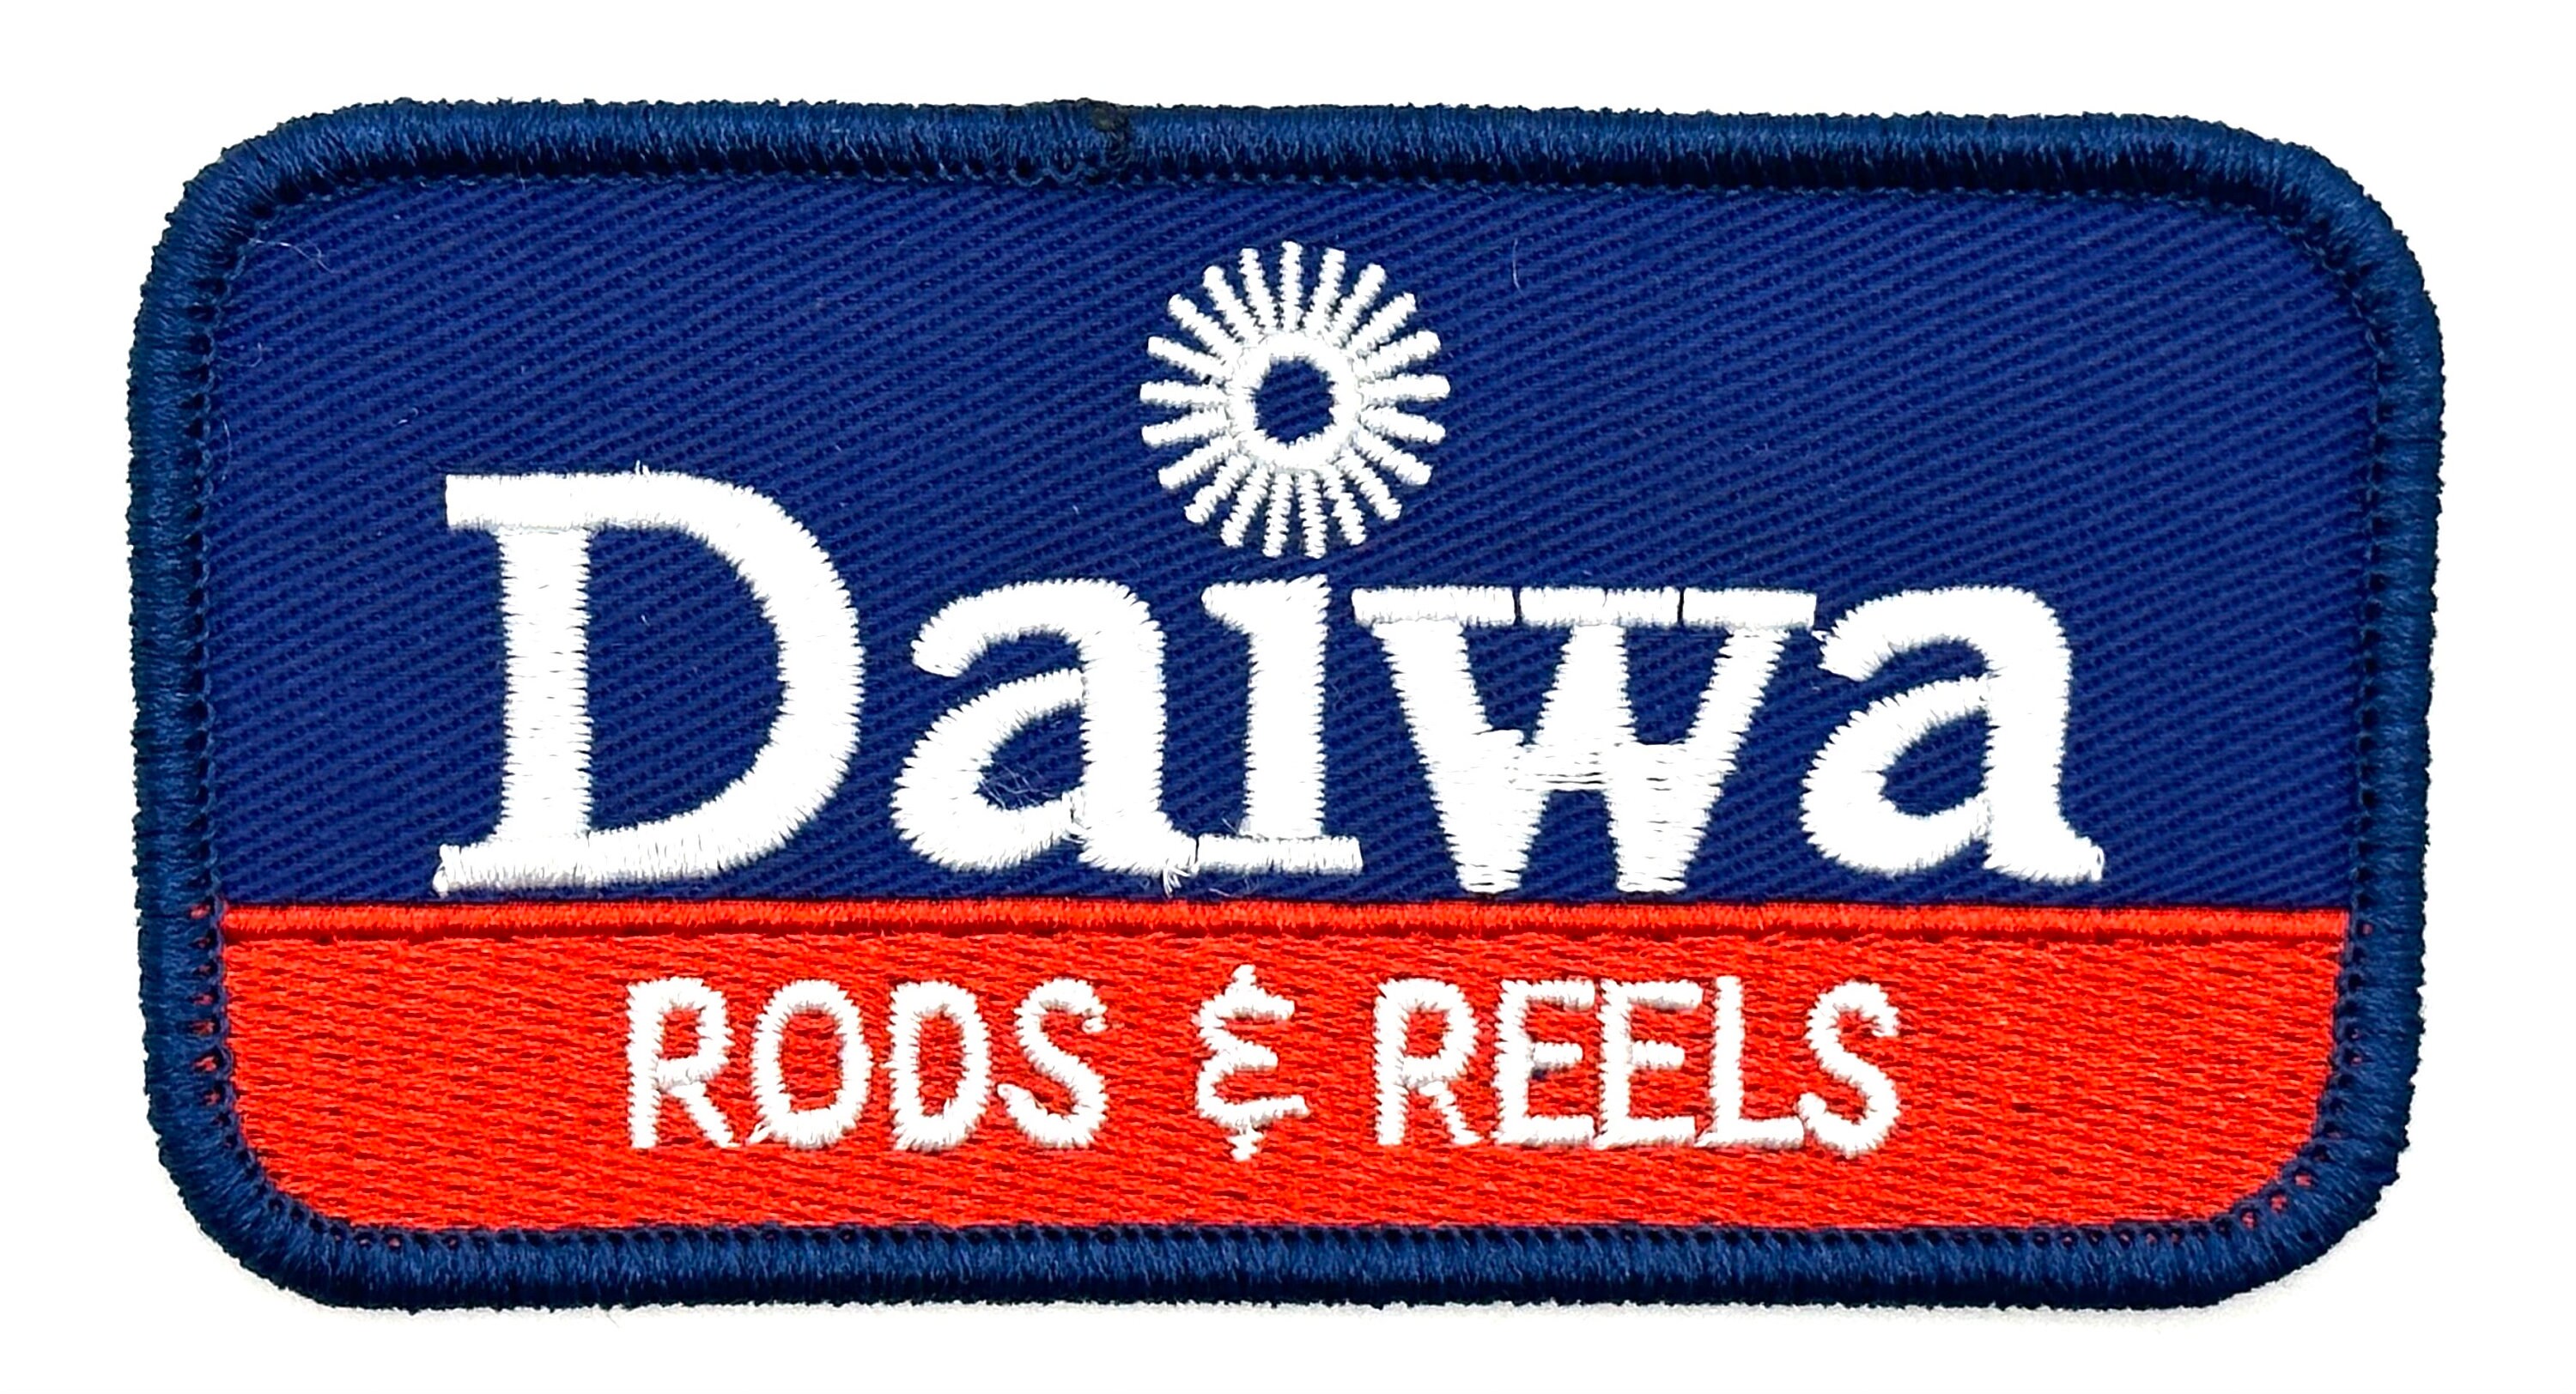 Daiwa Rods & Reels Fishing Lures Patch Tackle Vintage Style Retro